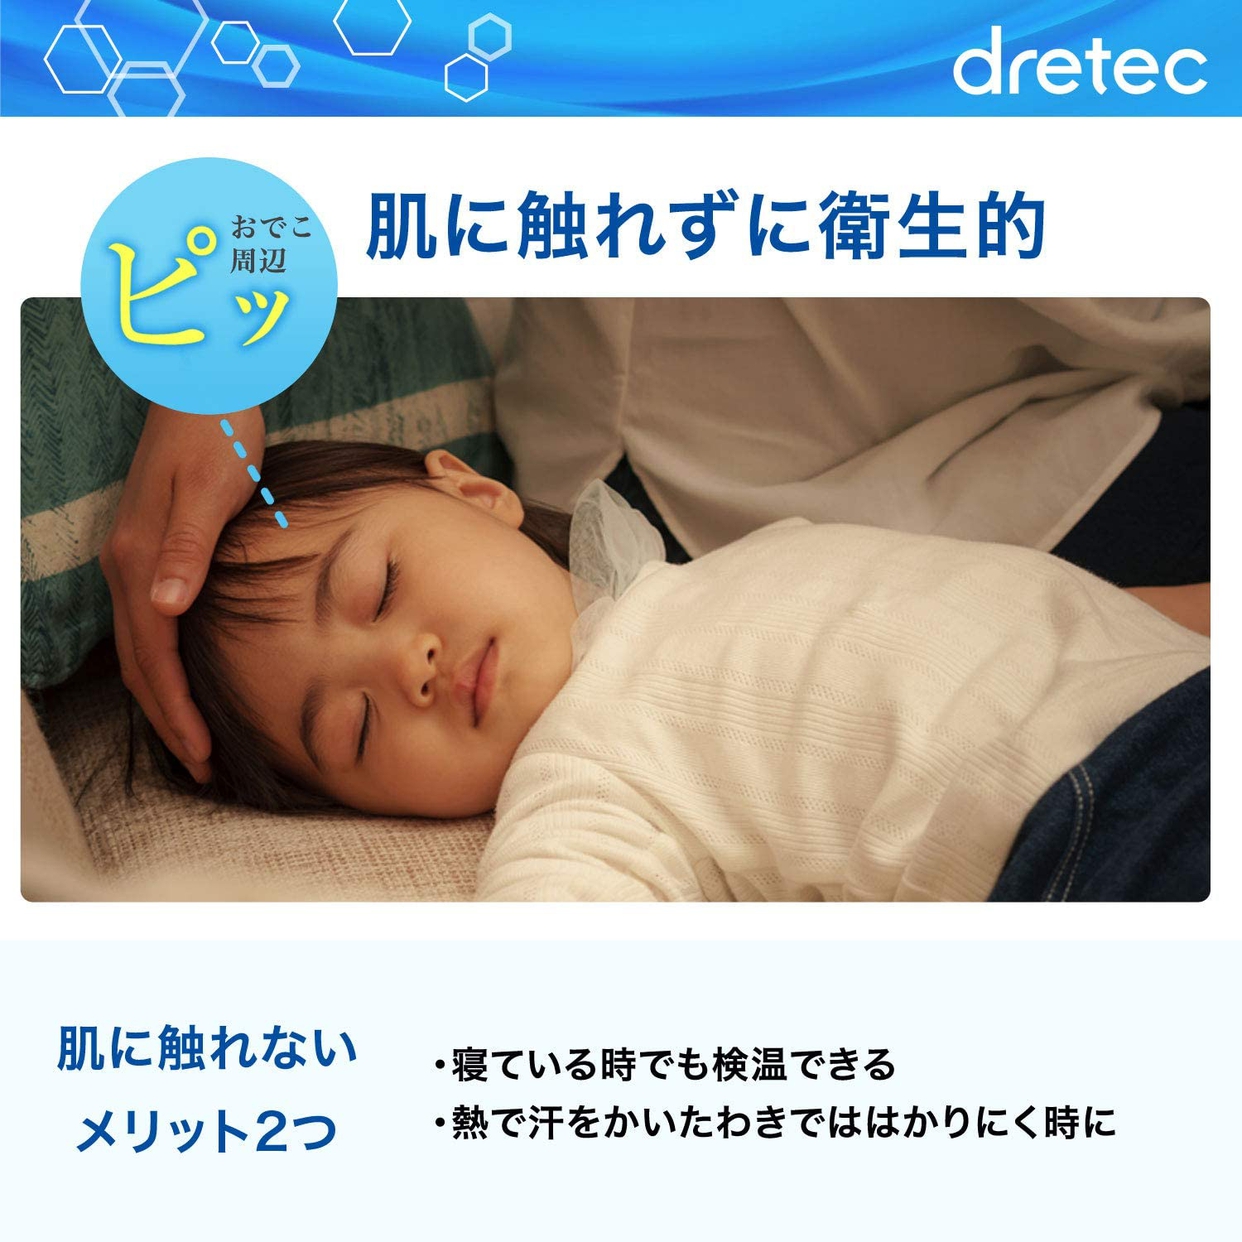 dretec(ドリテック) 非接触スキャン体温計 TO-402の商品画像サムネ6 